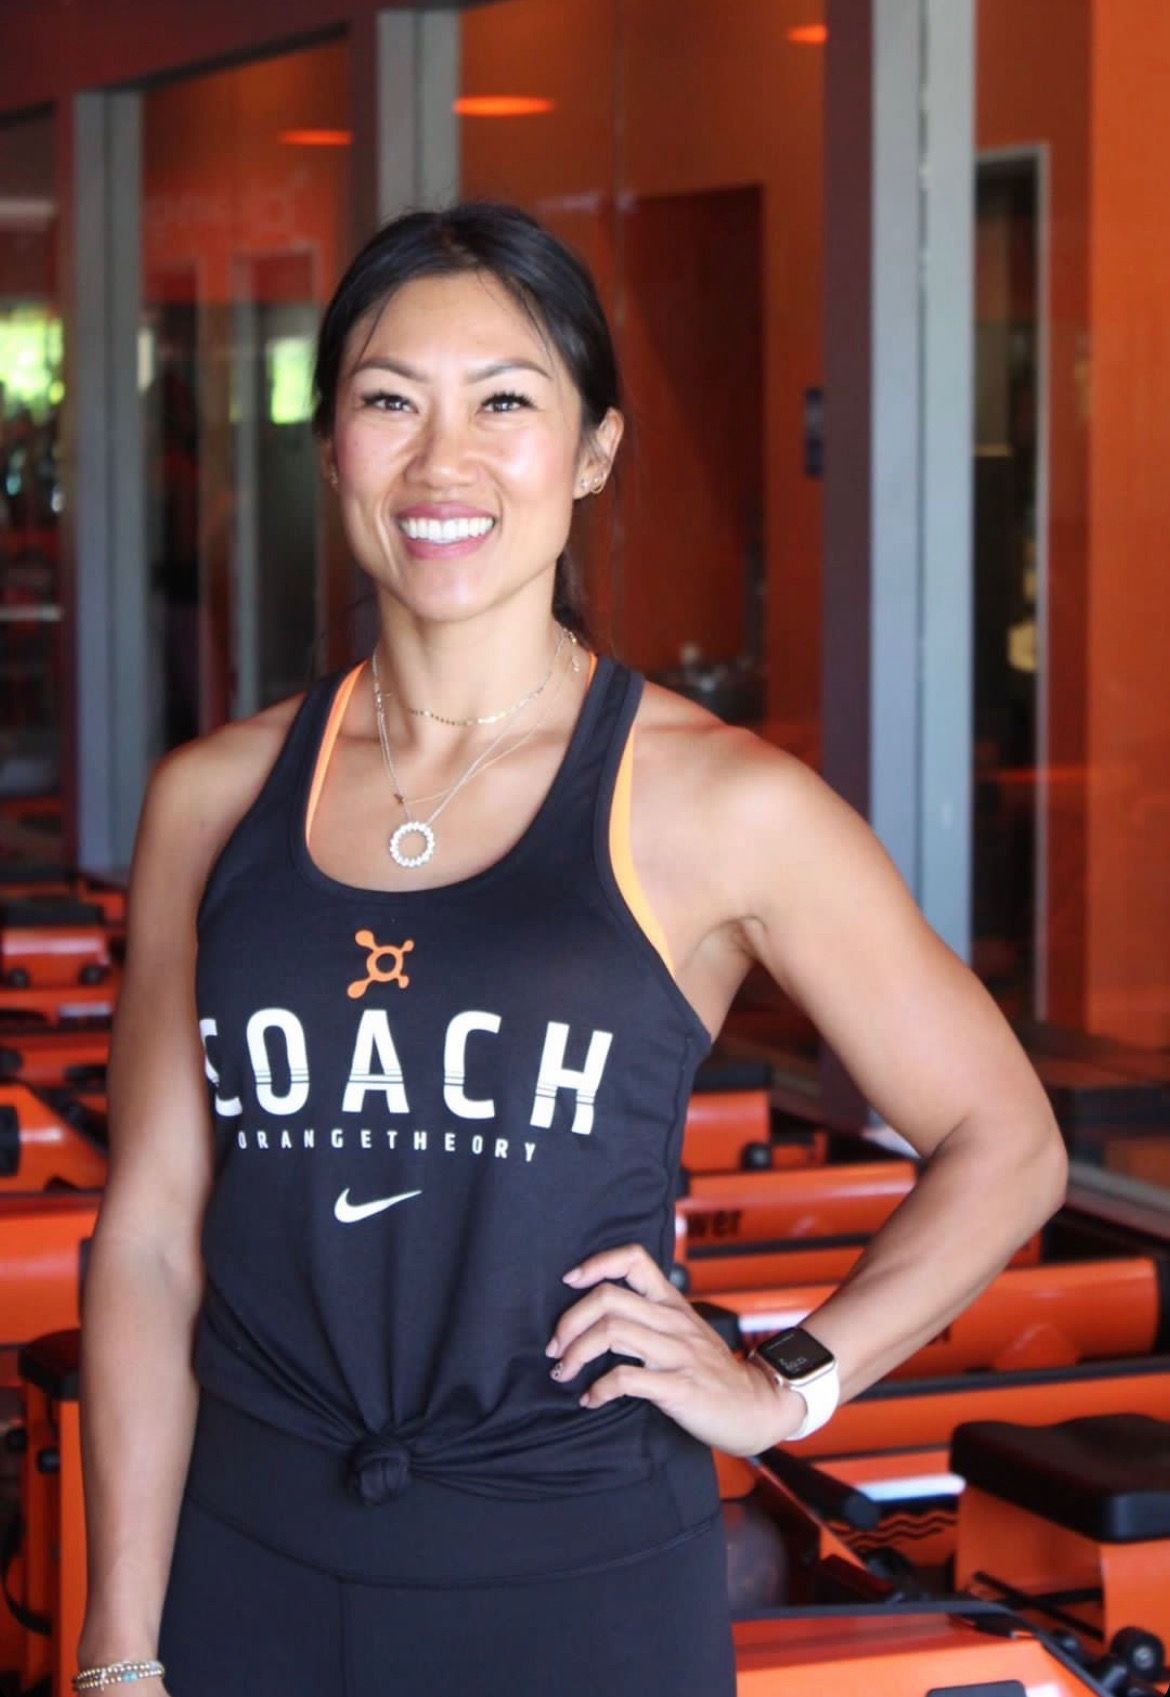 How I Found Community at a Fitness Studio